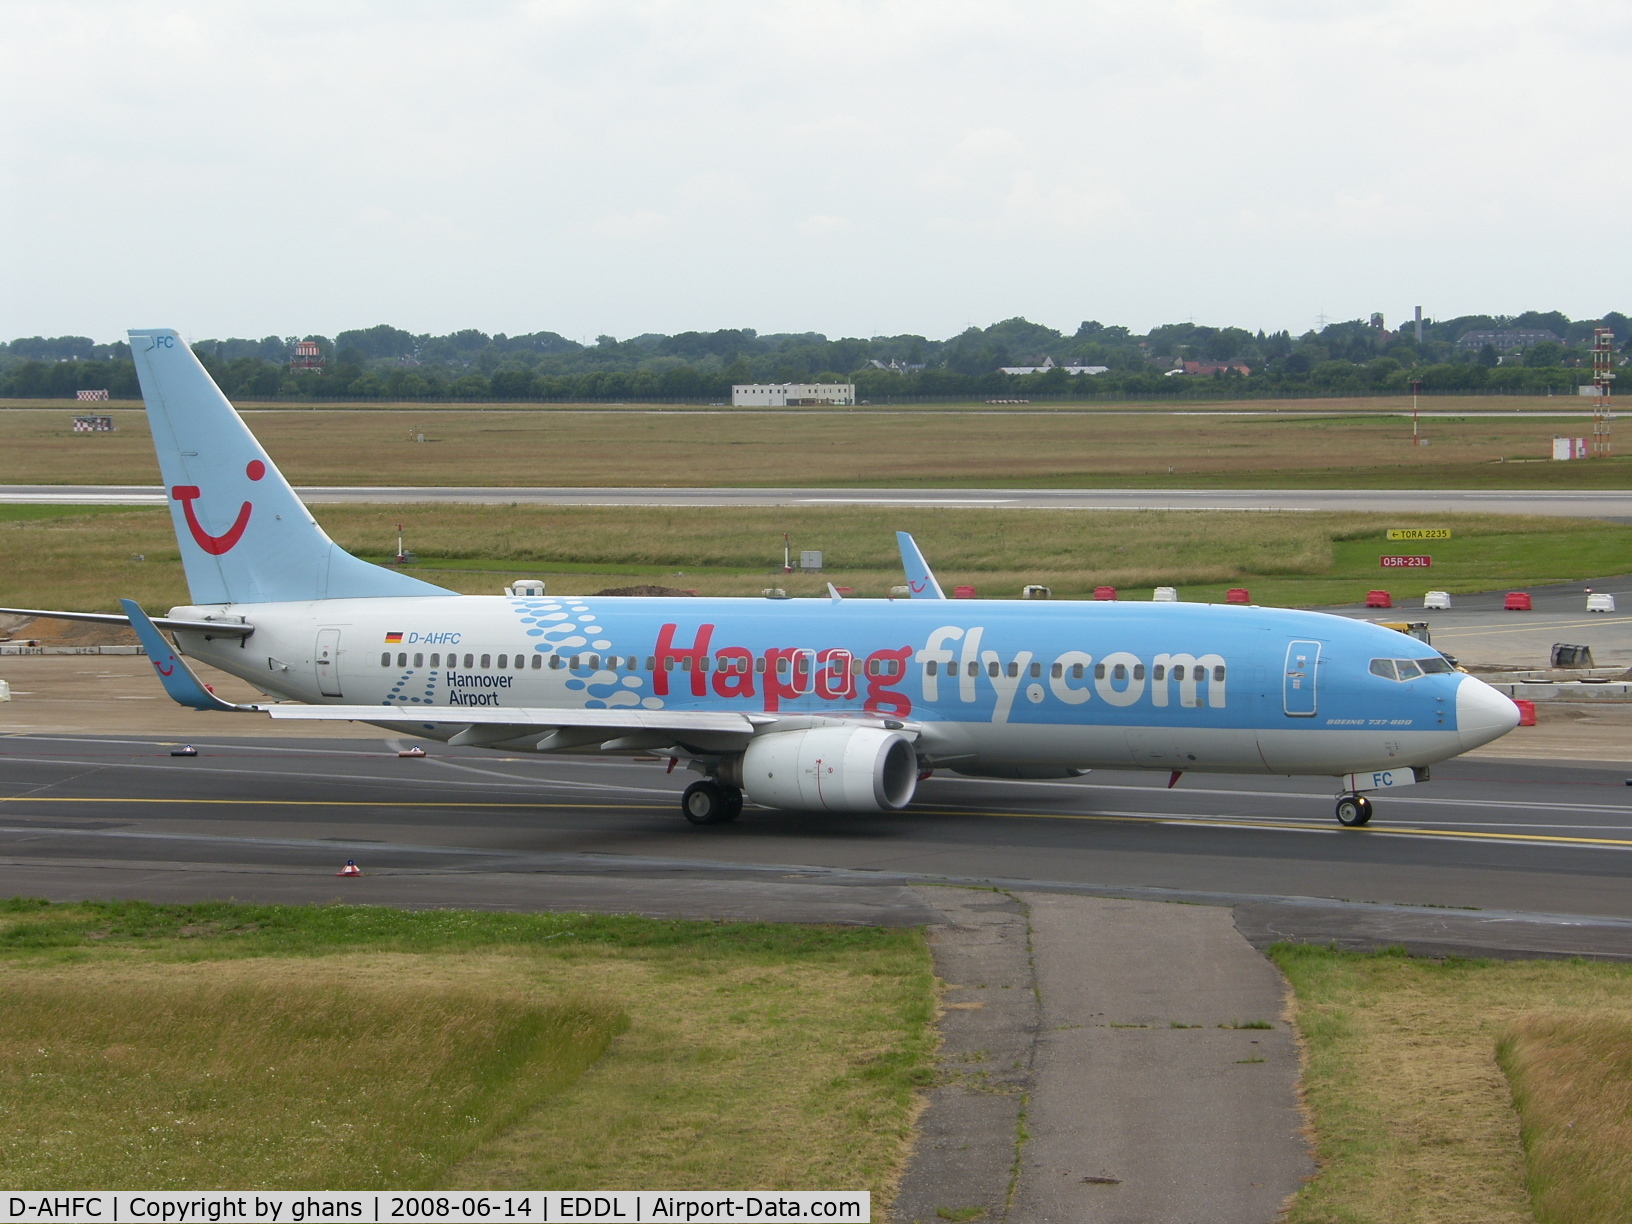 D-AHFC, 1998 Boeing 737-8K5 C/N 27977, Adverticing for Hannover Airport